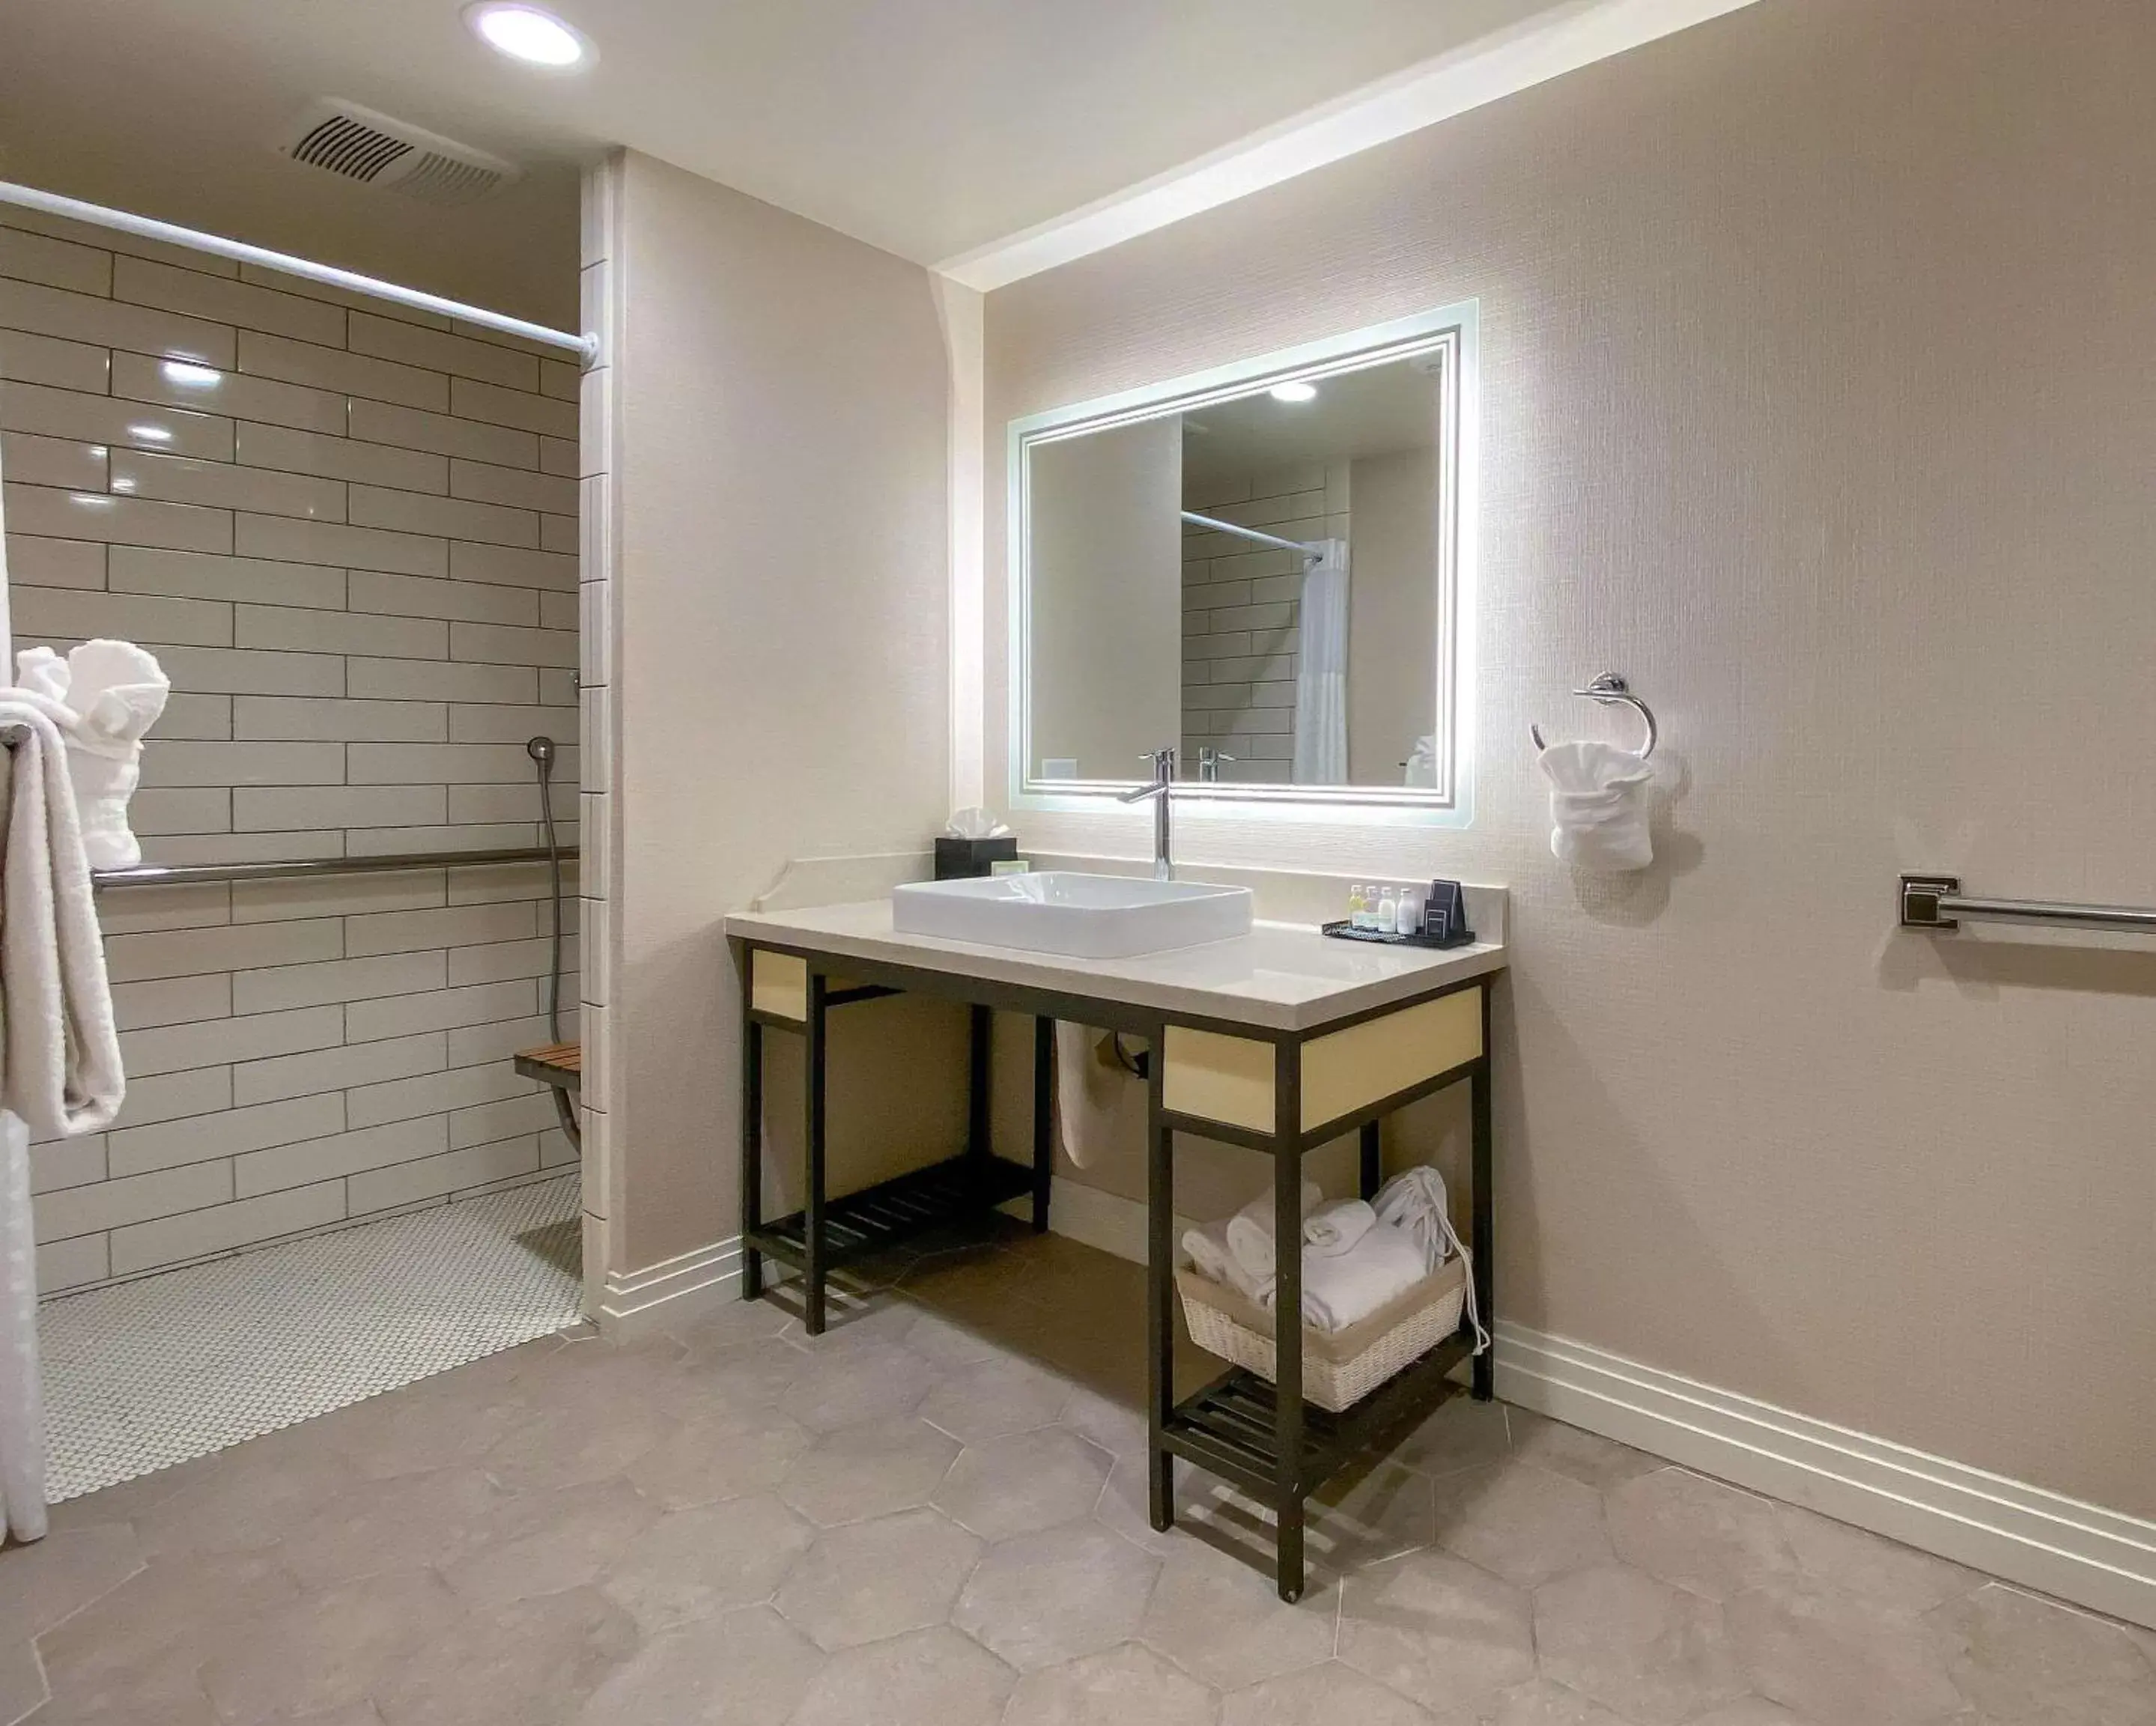 Bathroom in Bluestem Hotel Torrance Los Angeles, Ascend Hotel Collection